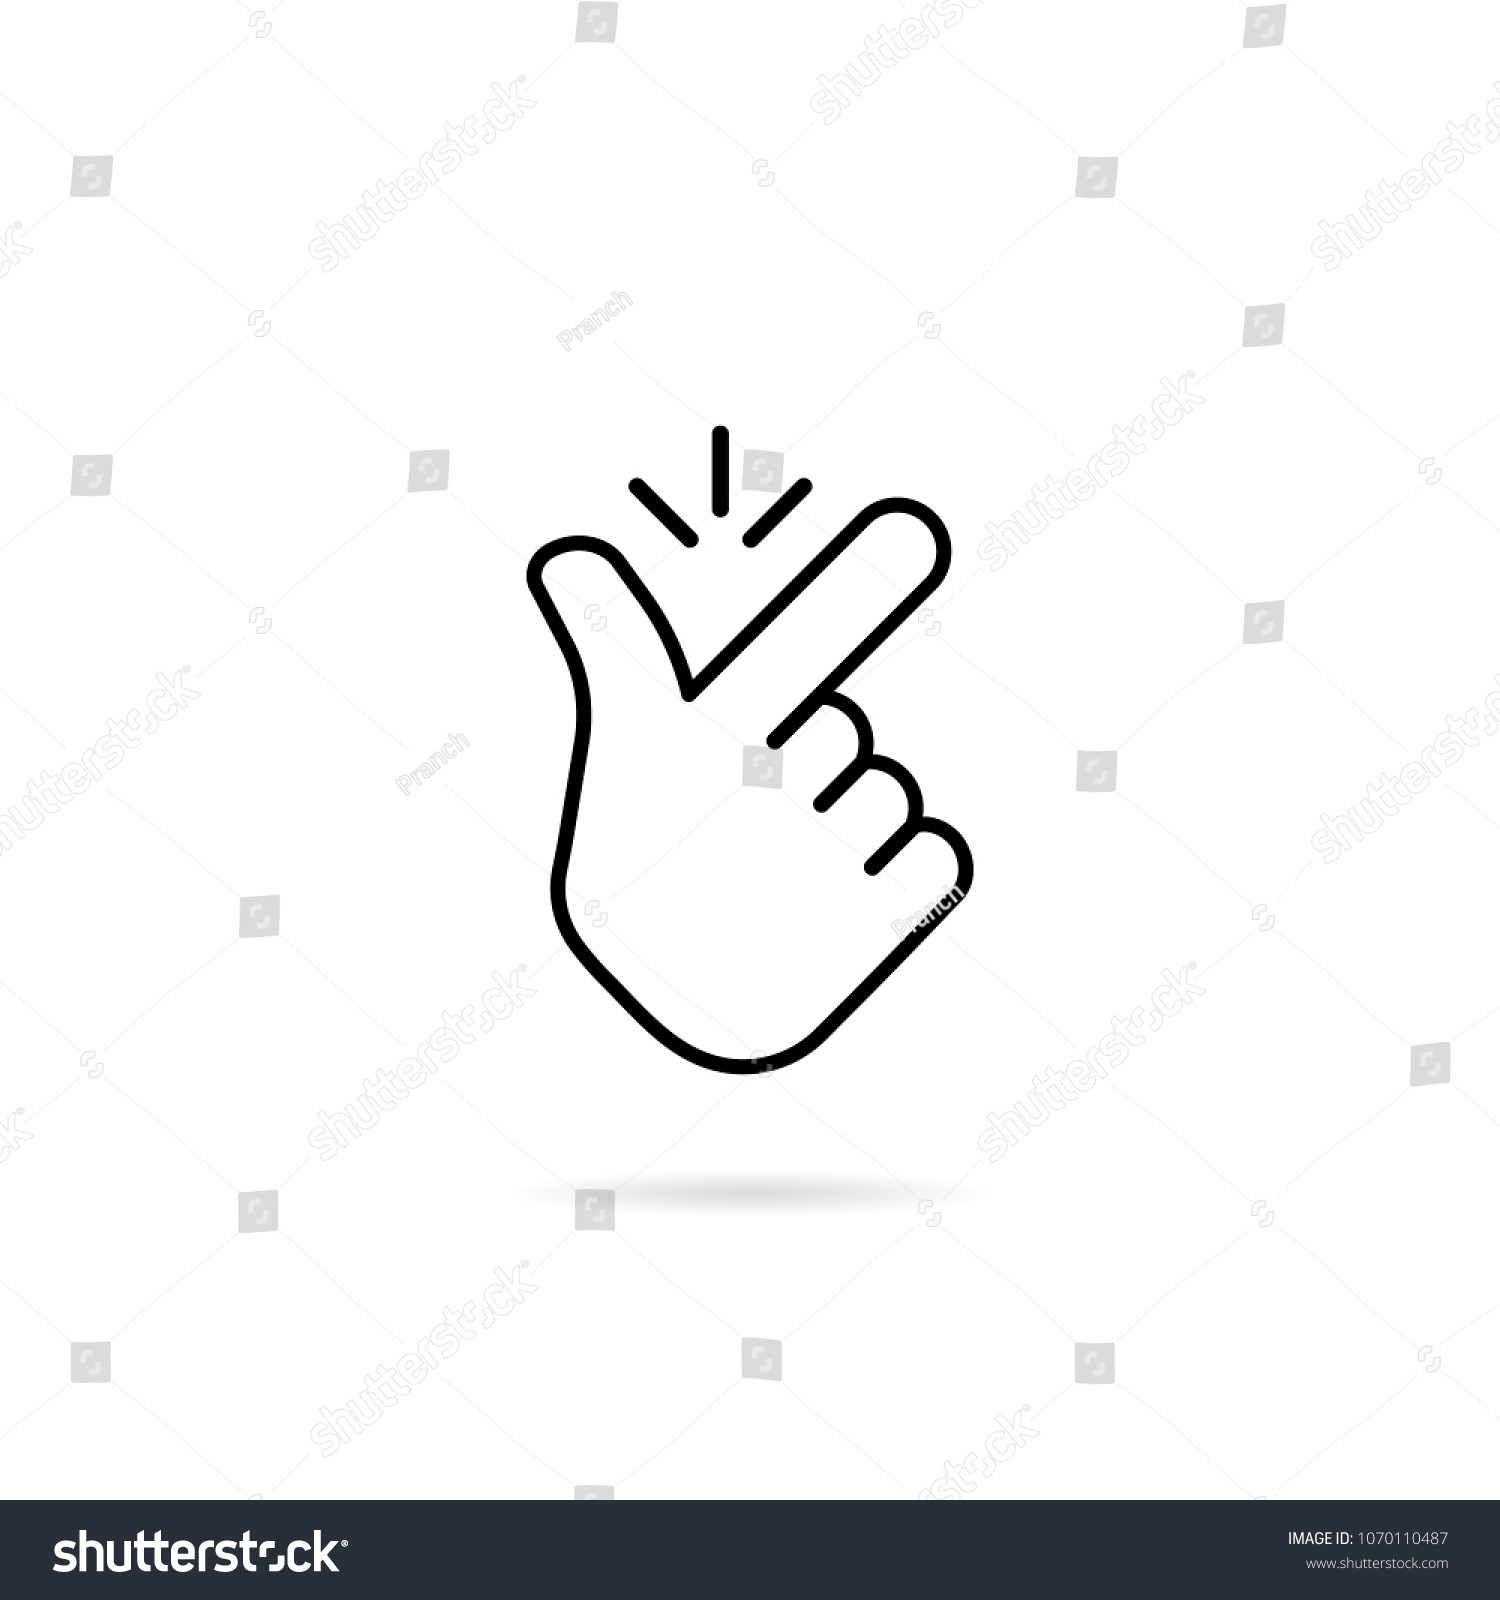 thin line snap finger like easy logo. concept of female or male make flicking fingers and popular gesturing. linear abstract trend simple okey logotype graphic design isolated on white background #1070110487